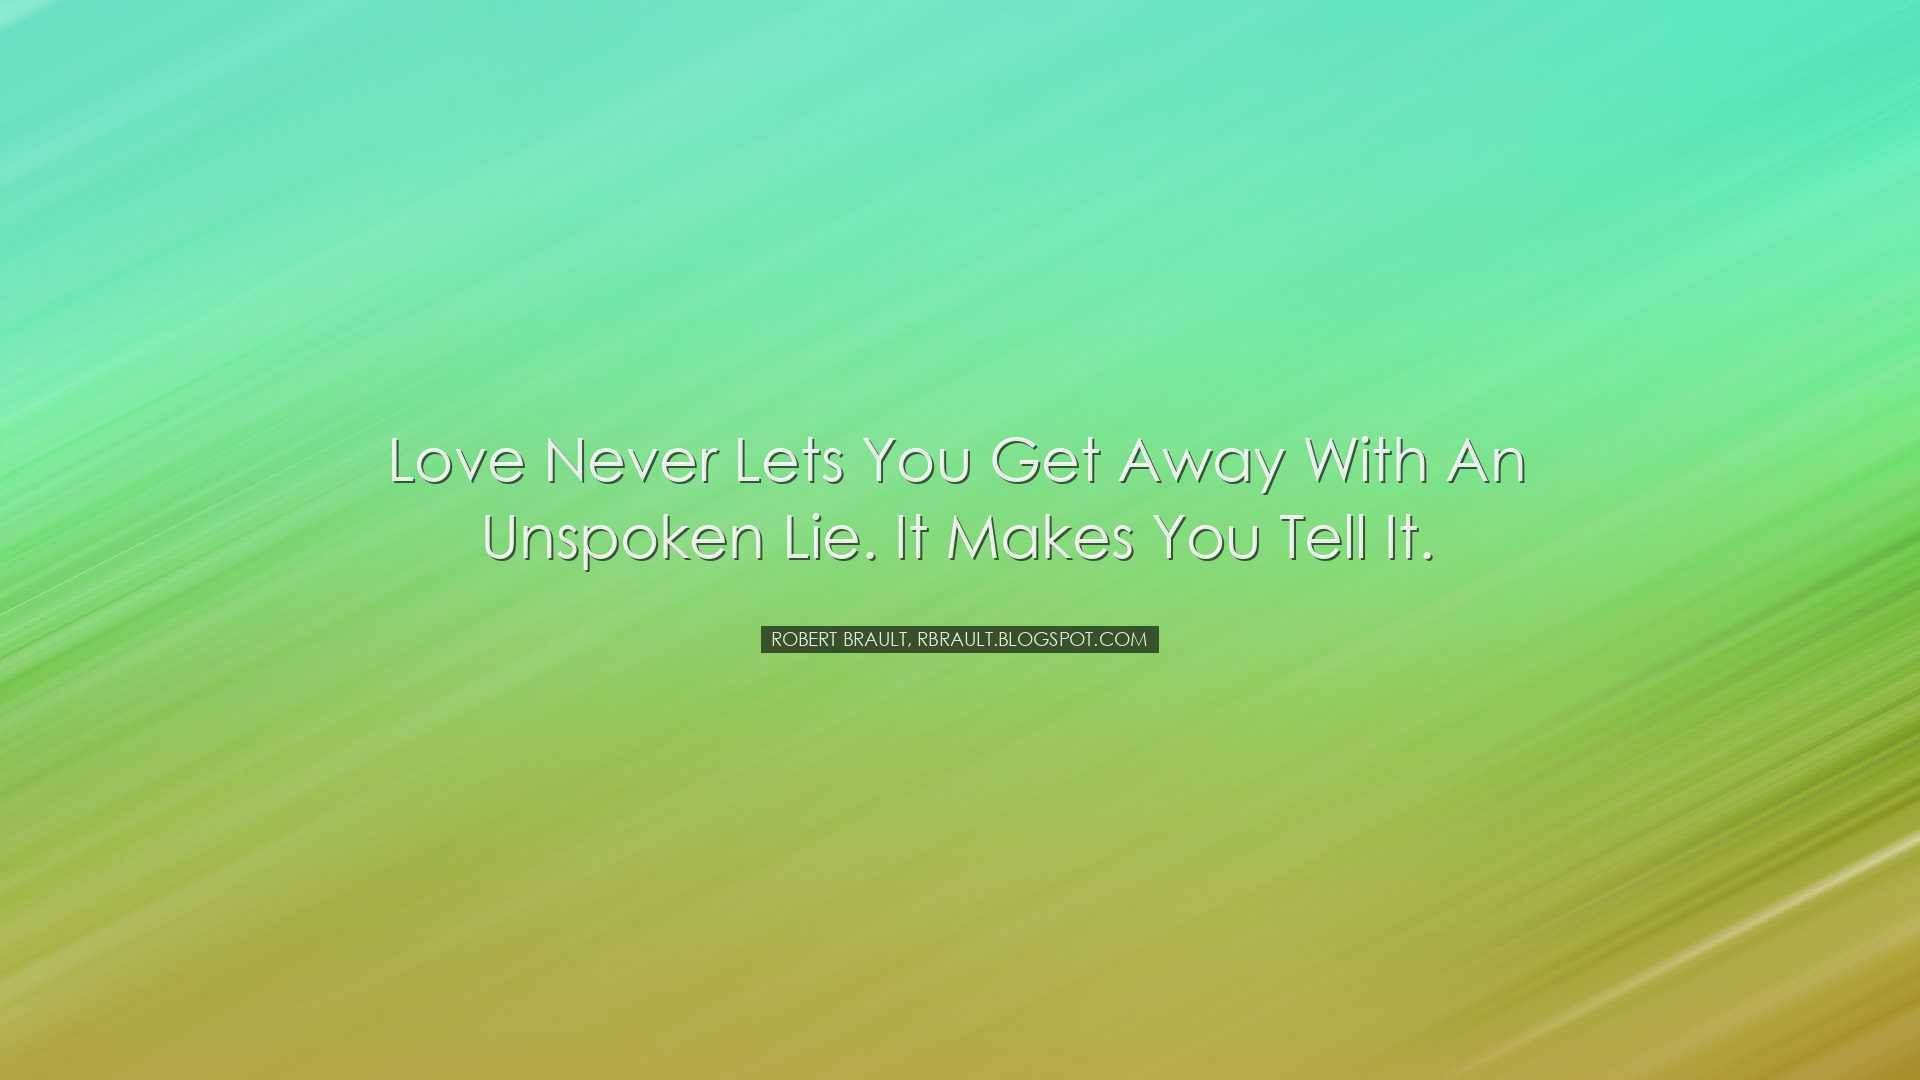 Love never lets you get away with an unspoken lie. It makes you te